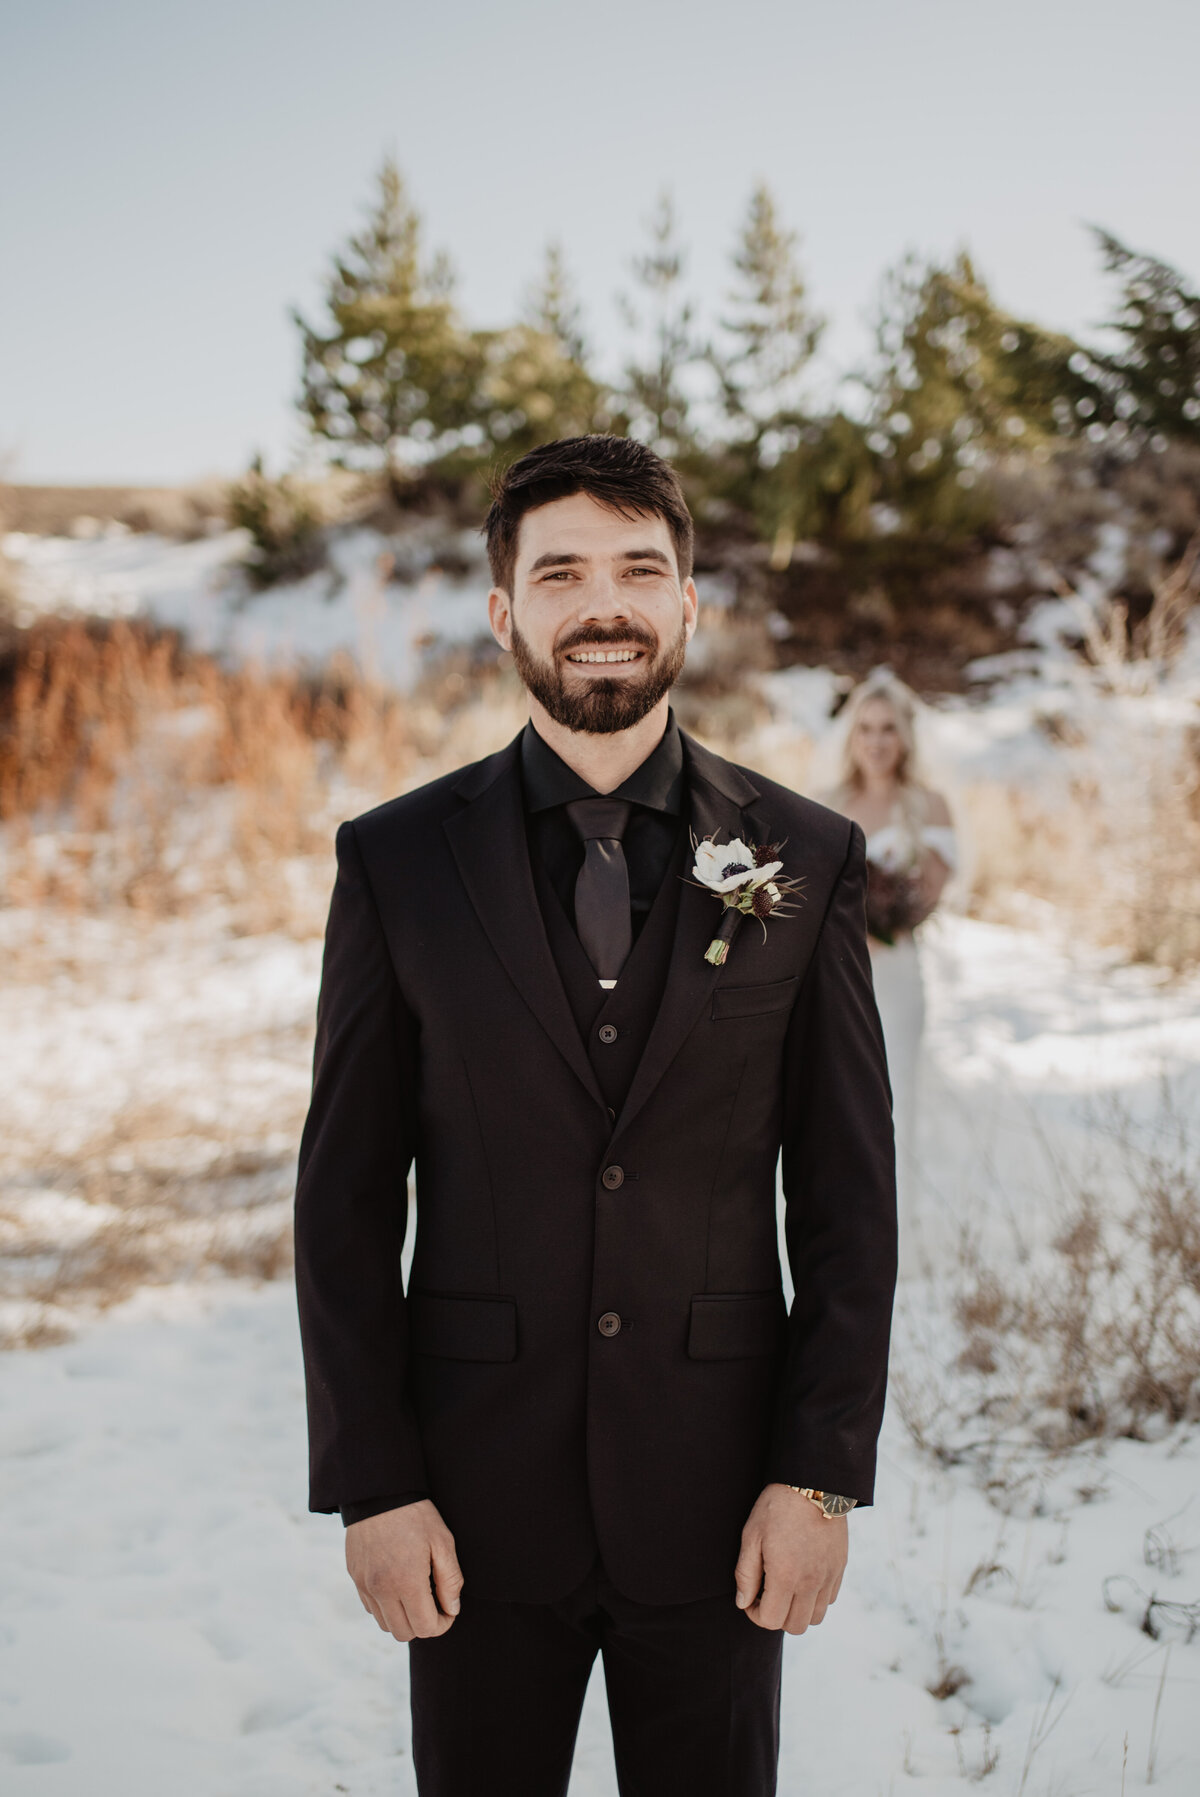 Jackson Hole photographers capture groom waiting for bride before first look